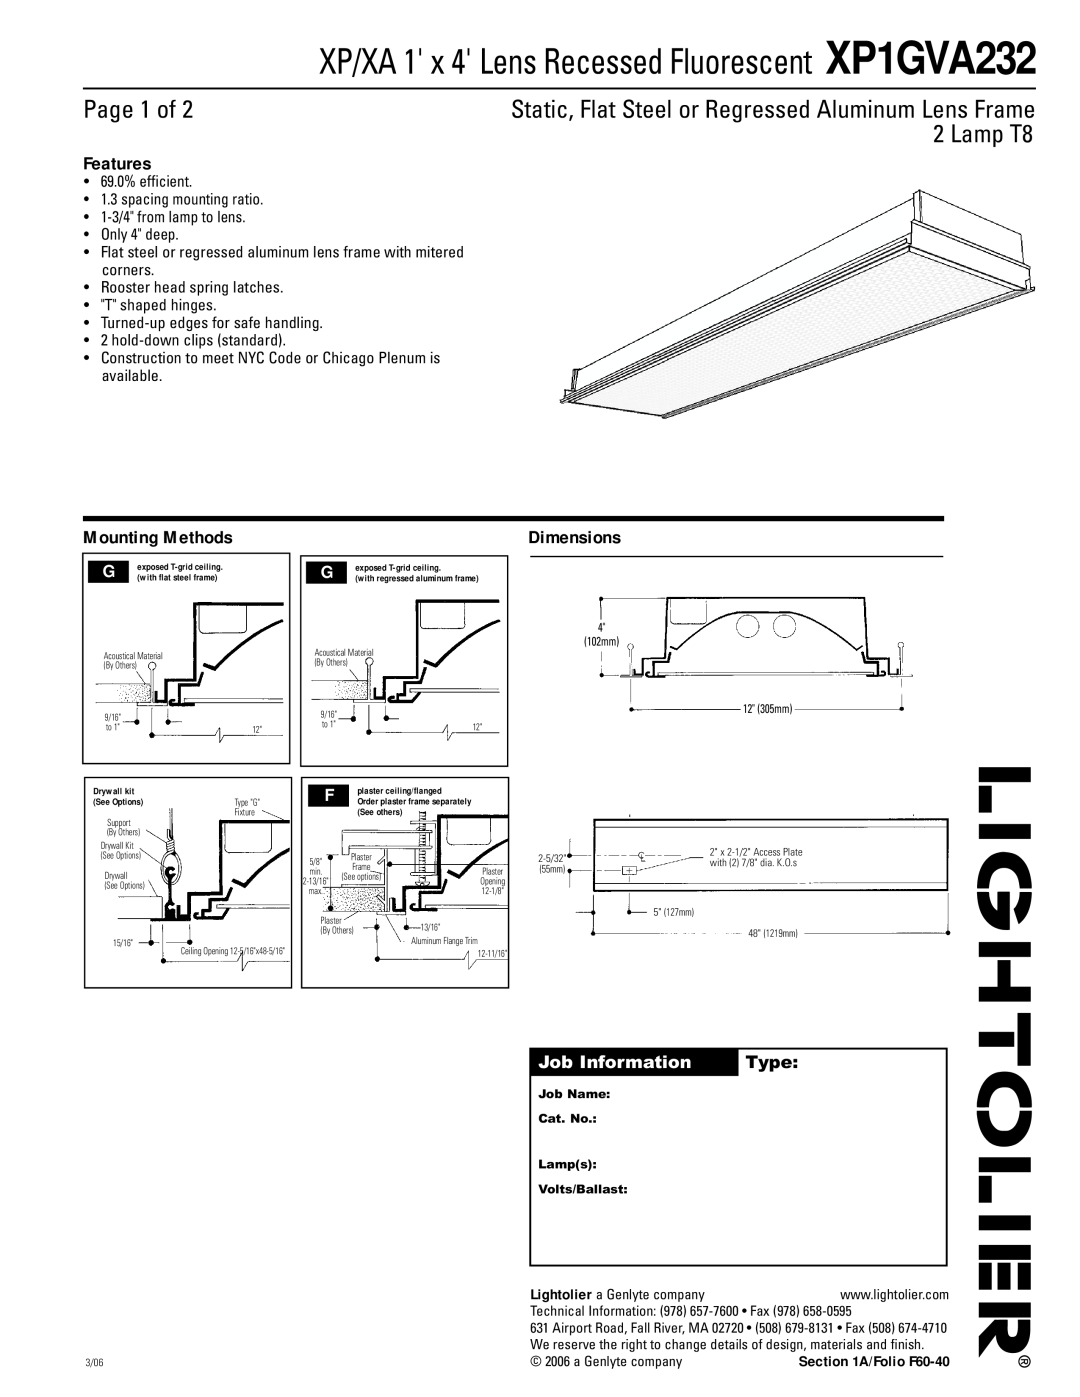 Lightolier XP1GVA232 dimensions Page 1 of, Lamp T8, Features, Mounting Methods, Job Information, Type, Dimensions 